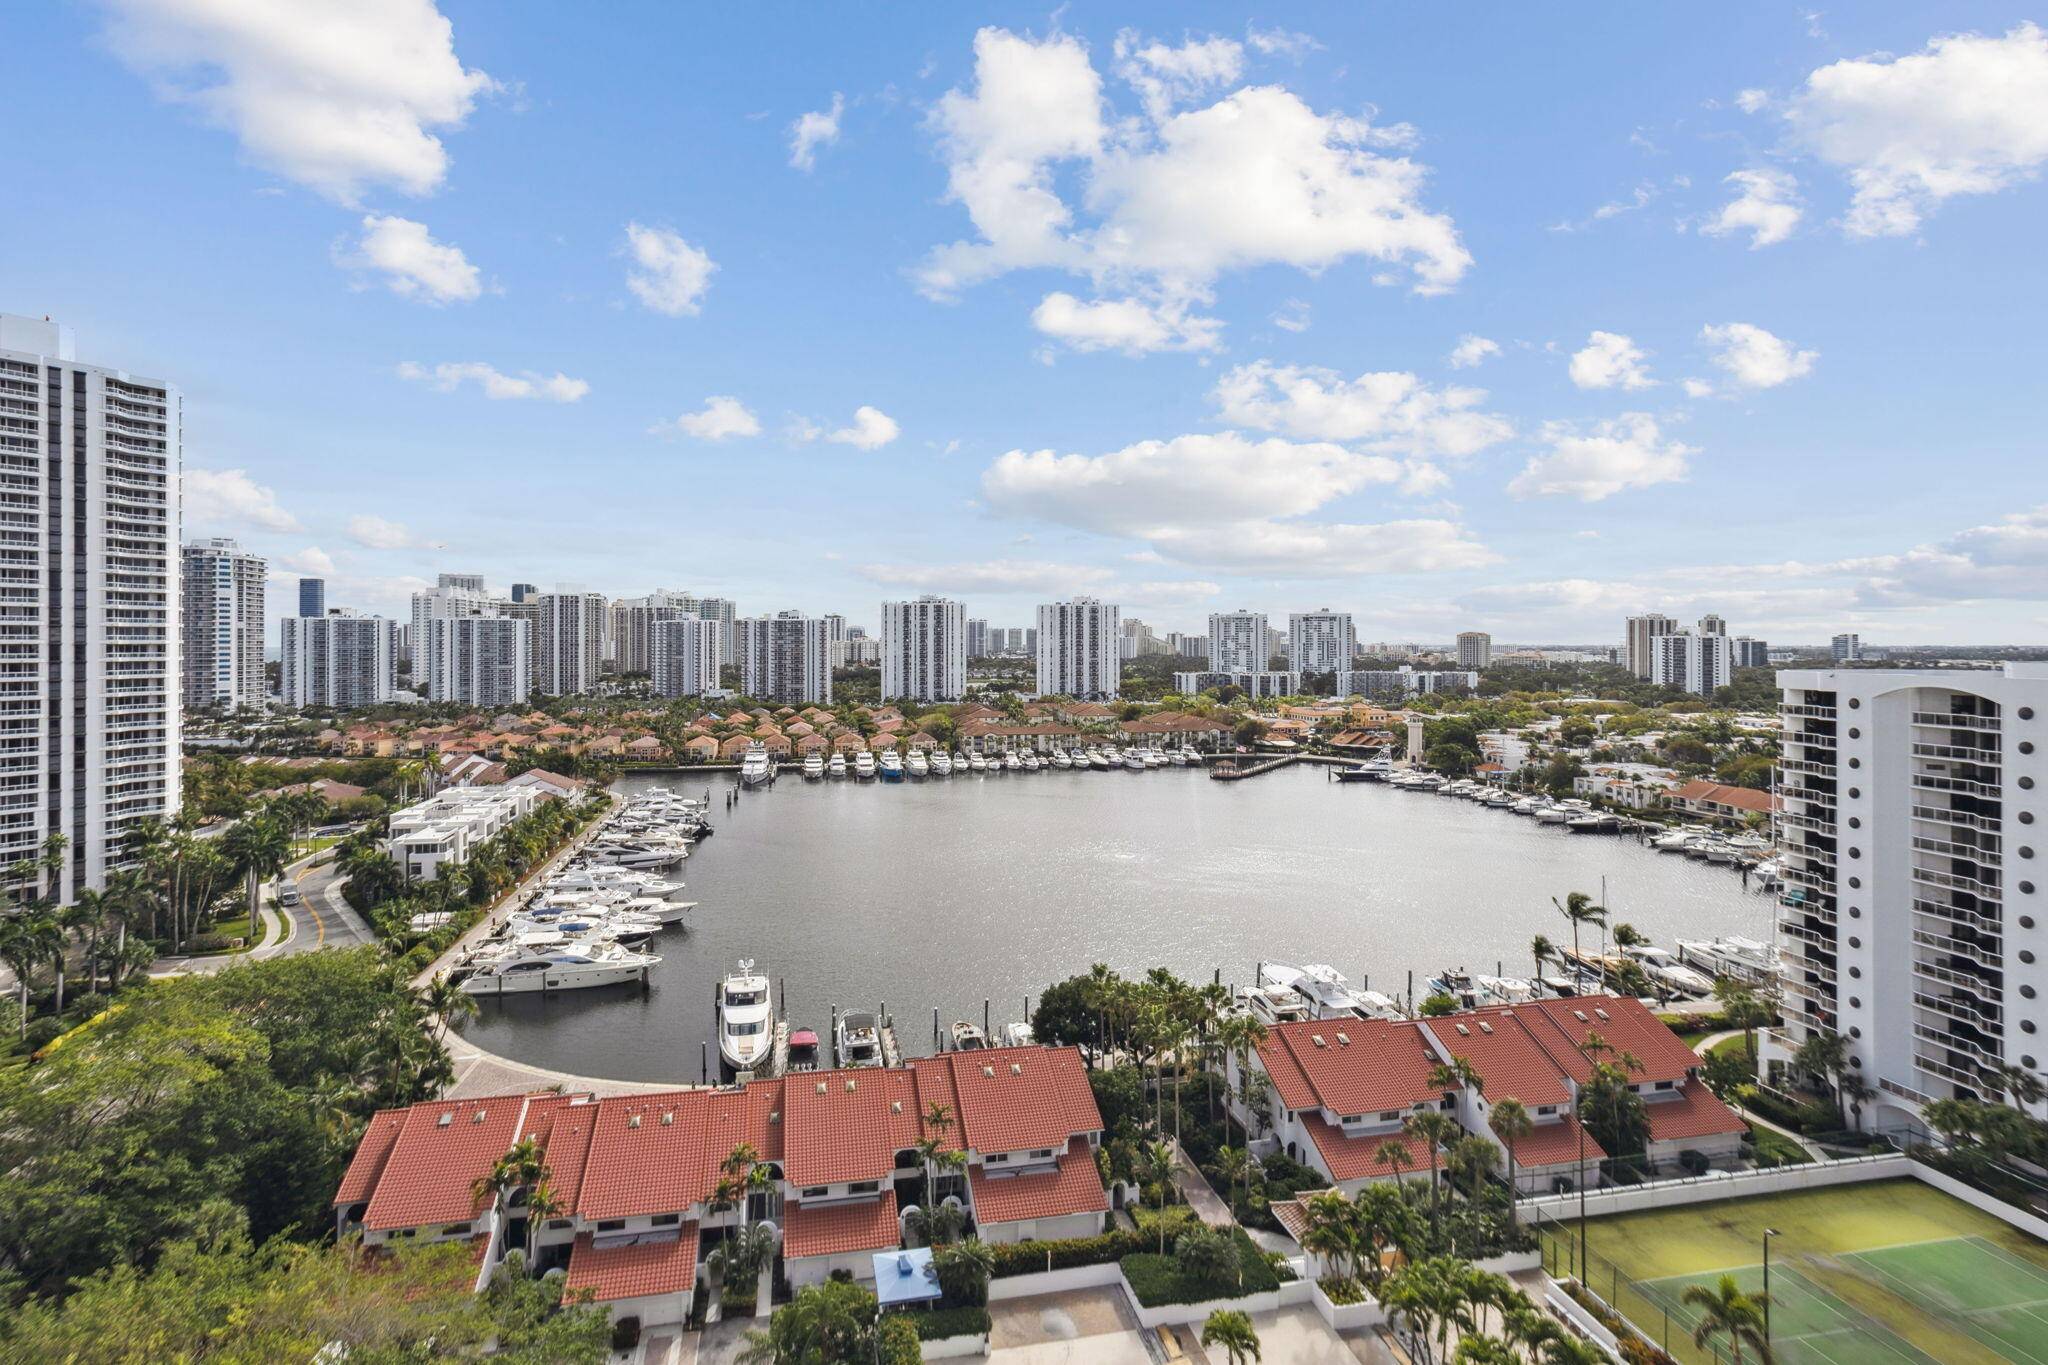 Unit 1706, poised on the 17th floor, presents an exceptional living experience accentuated by its corner positioning, offering breathtaking views of the ocean and water canals.